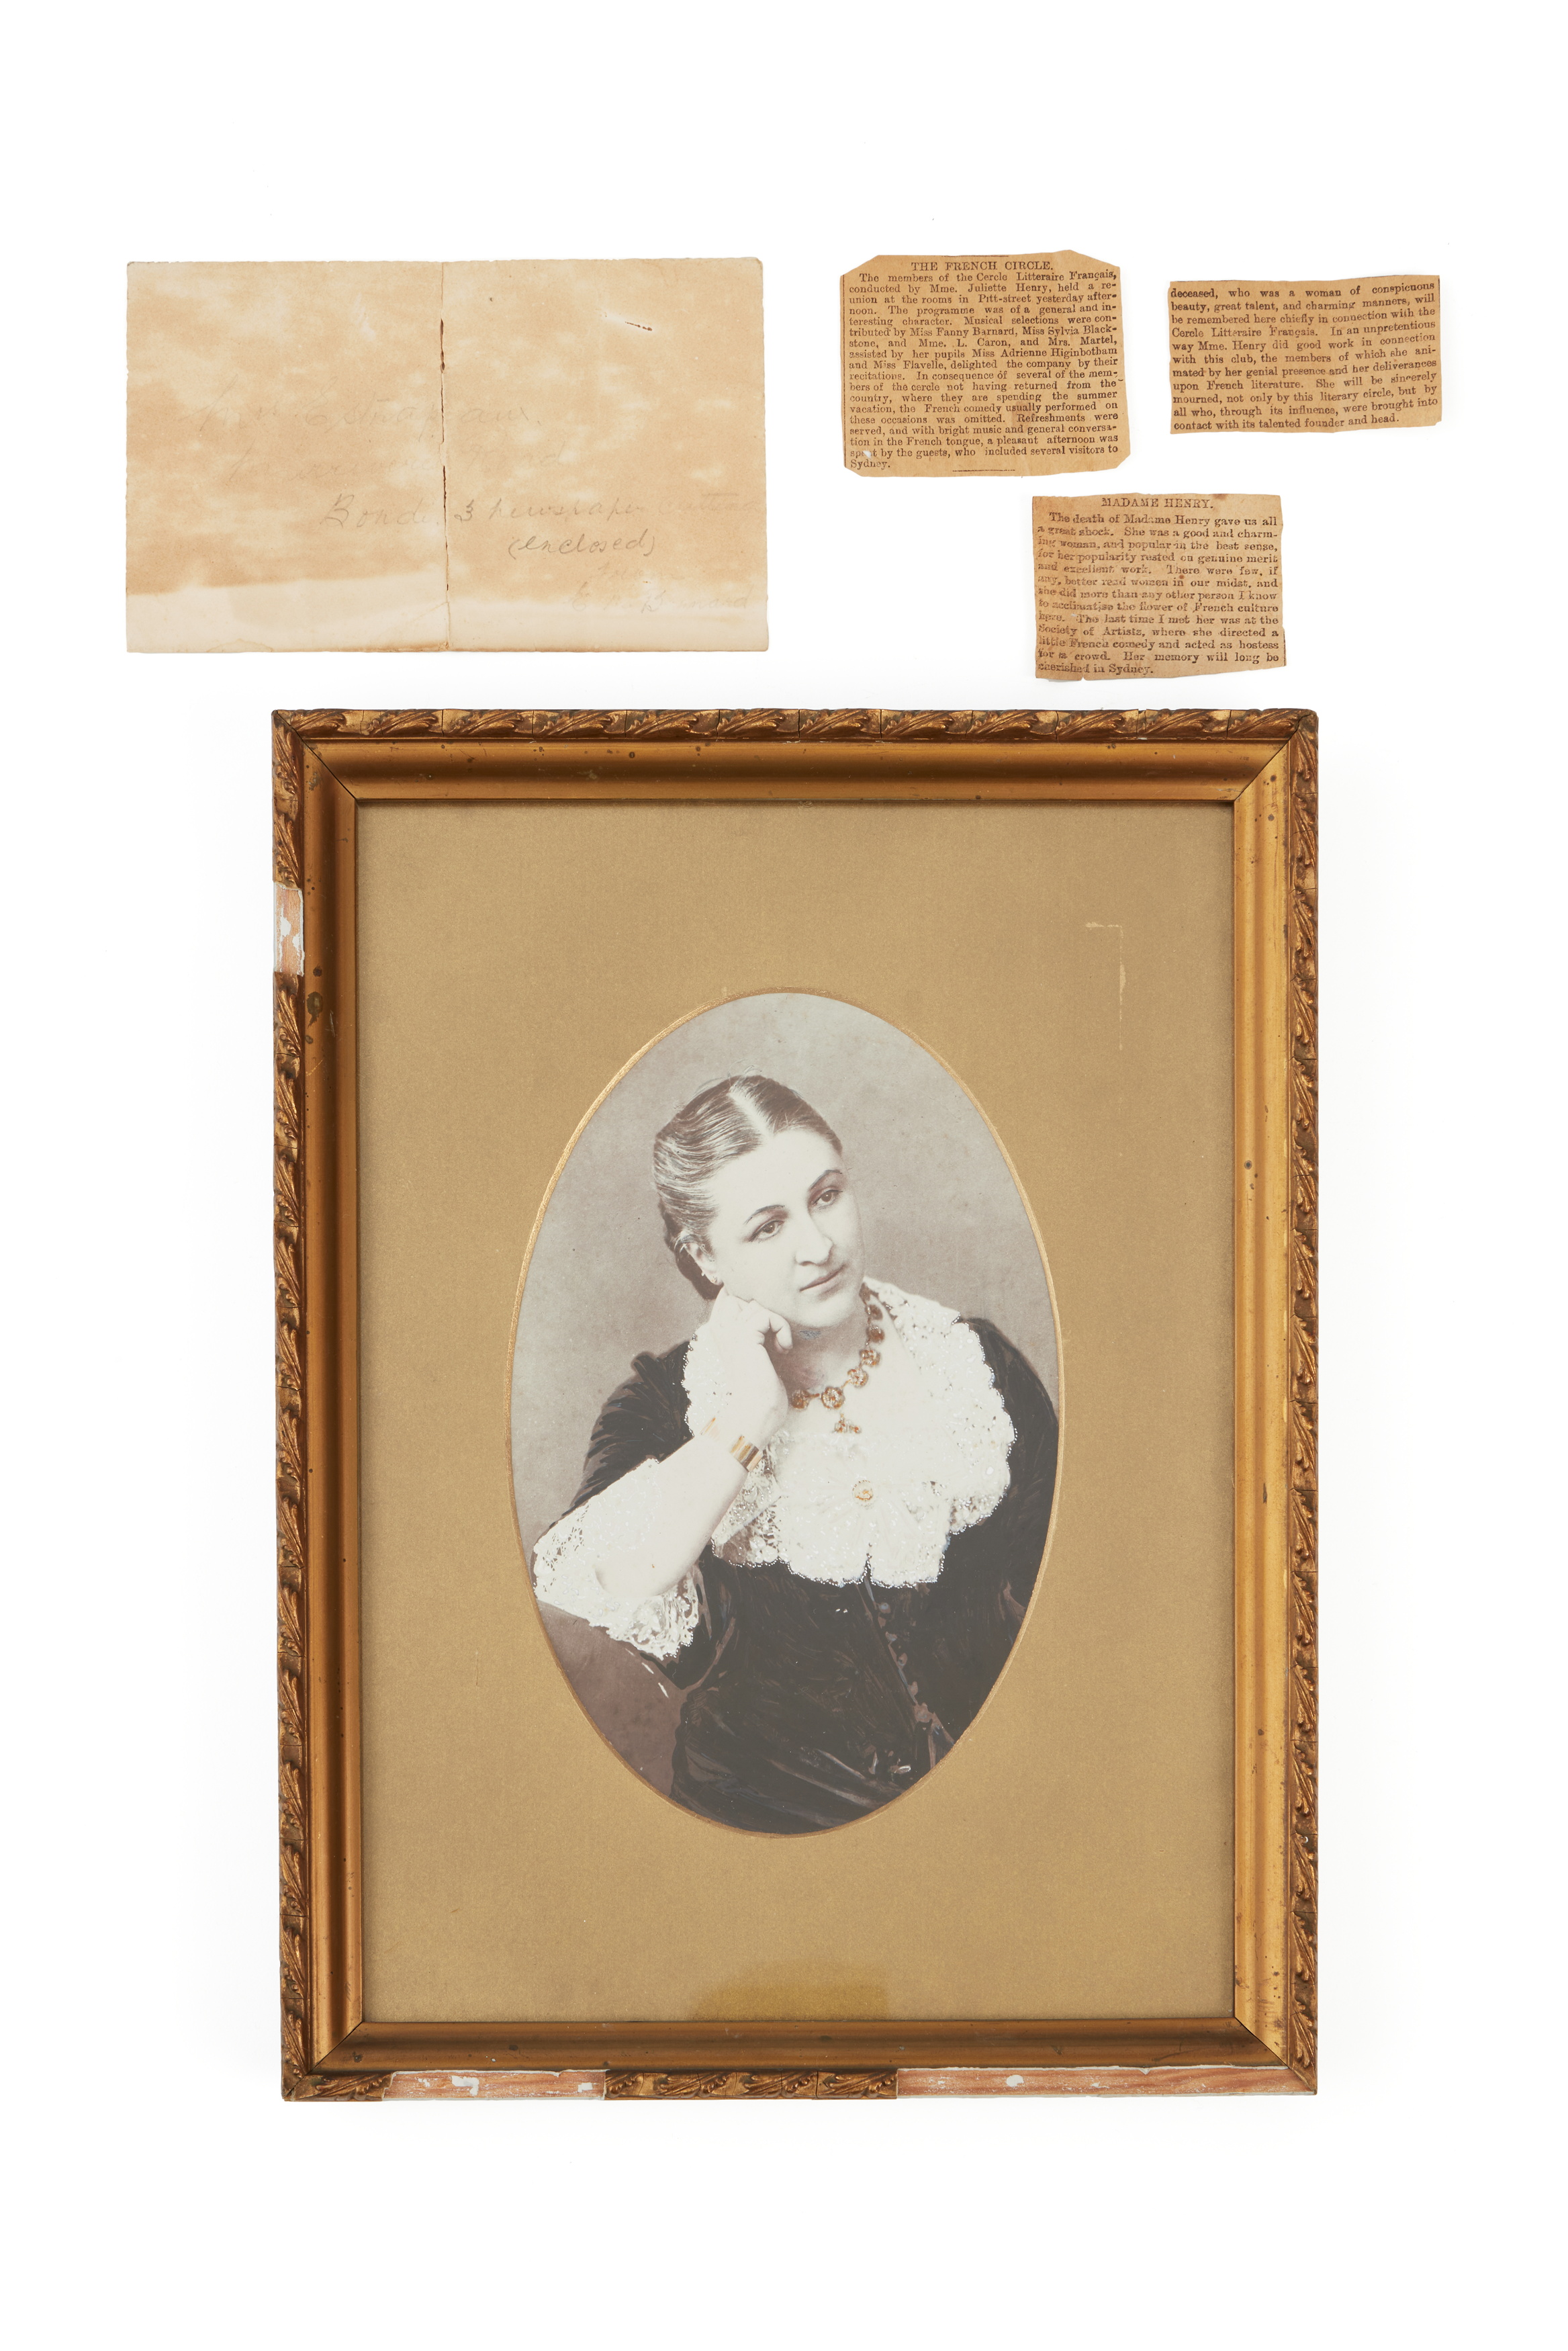 Collection of photographic material and newspaper clippings relating to Juliette Henry